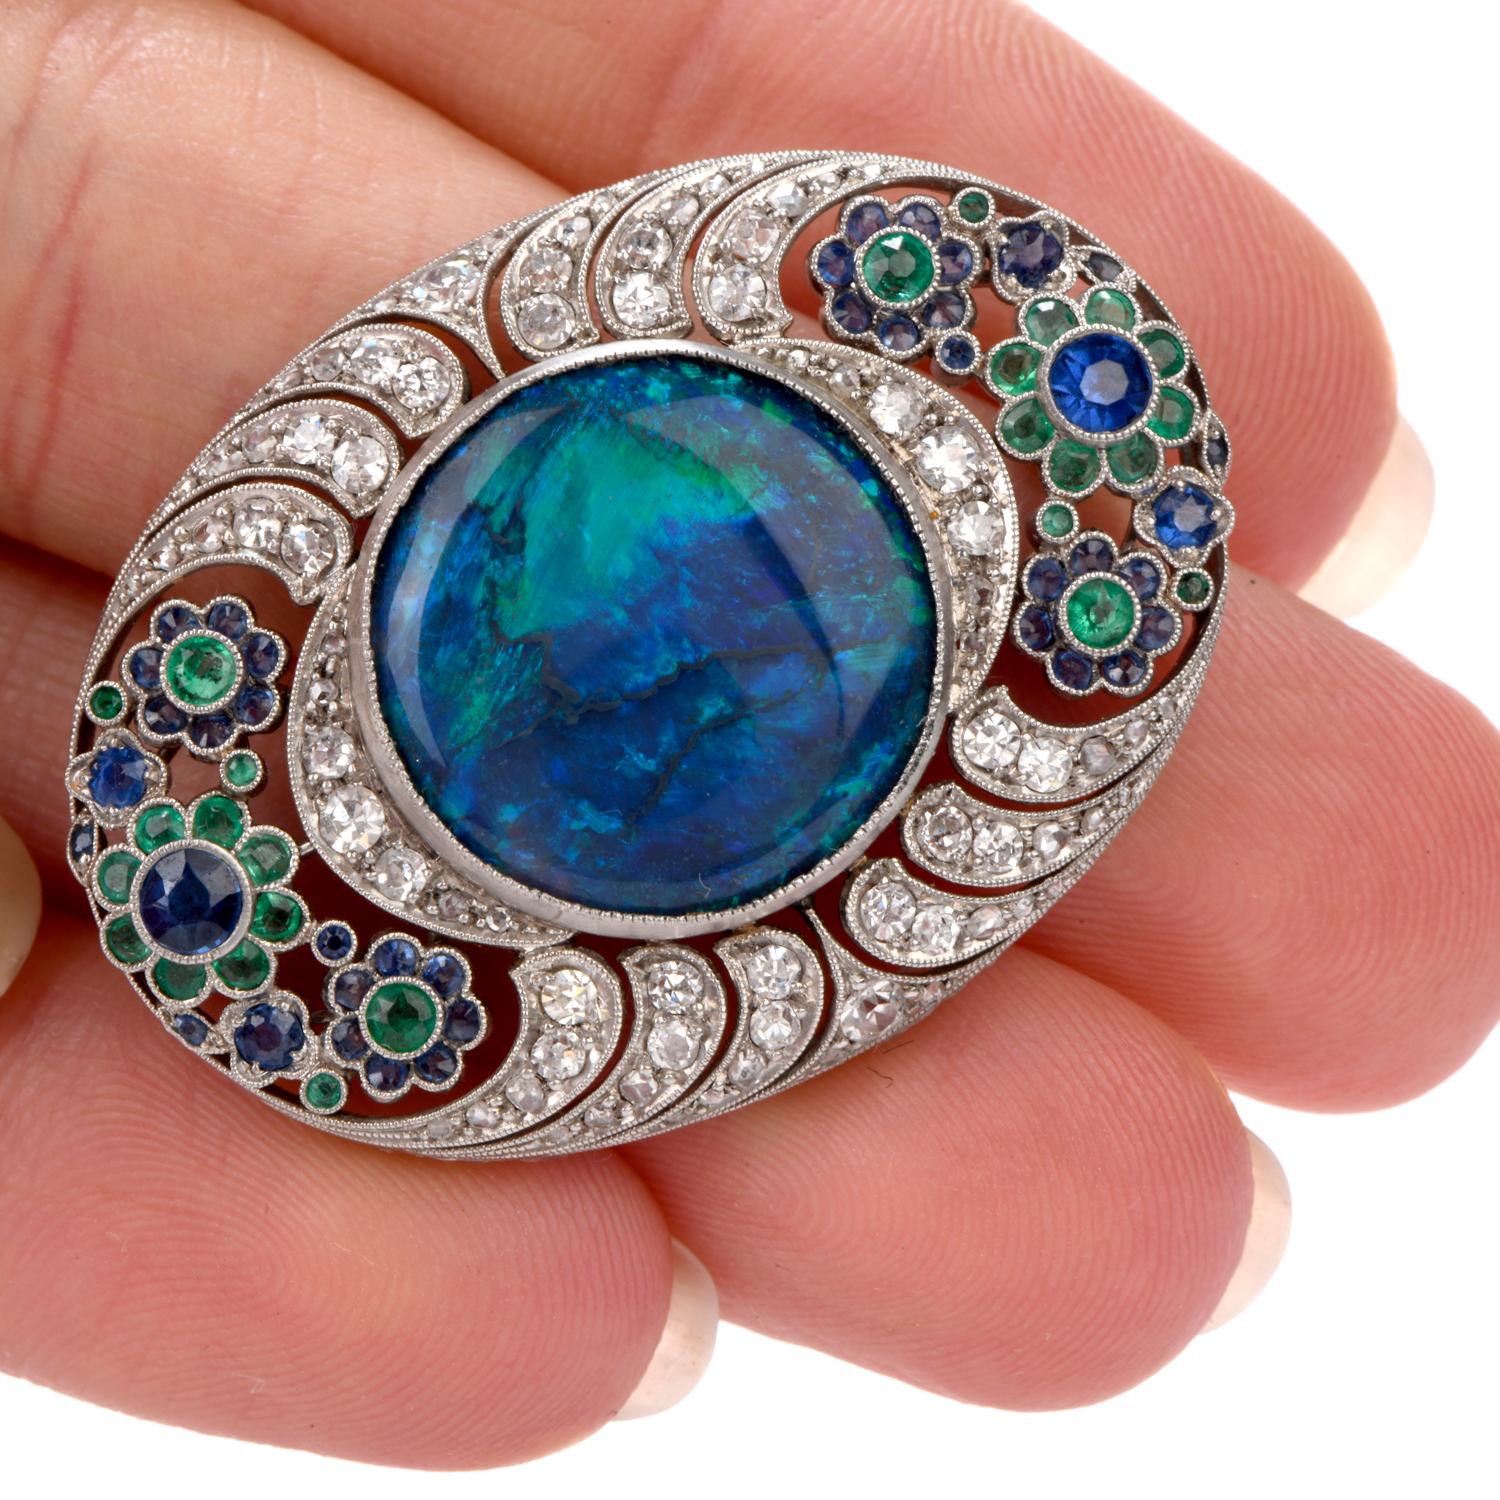 Antique art deco Diamond Opal Sapphire and Emerald Brooch pin inspired in 

a stunning floral motif and crafted in Platinum.

Adorning the center of this magnificent brooach is a round shaped

 Black Opal gem measuring appx. 17.3mm in diameter